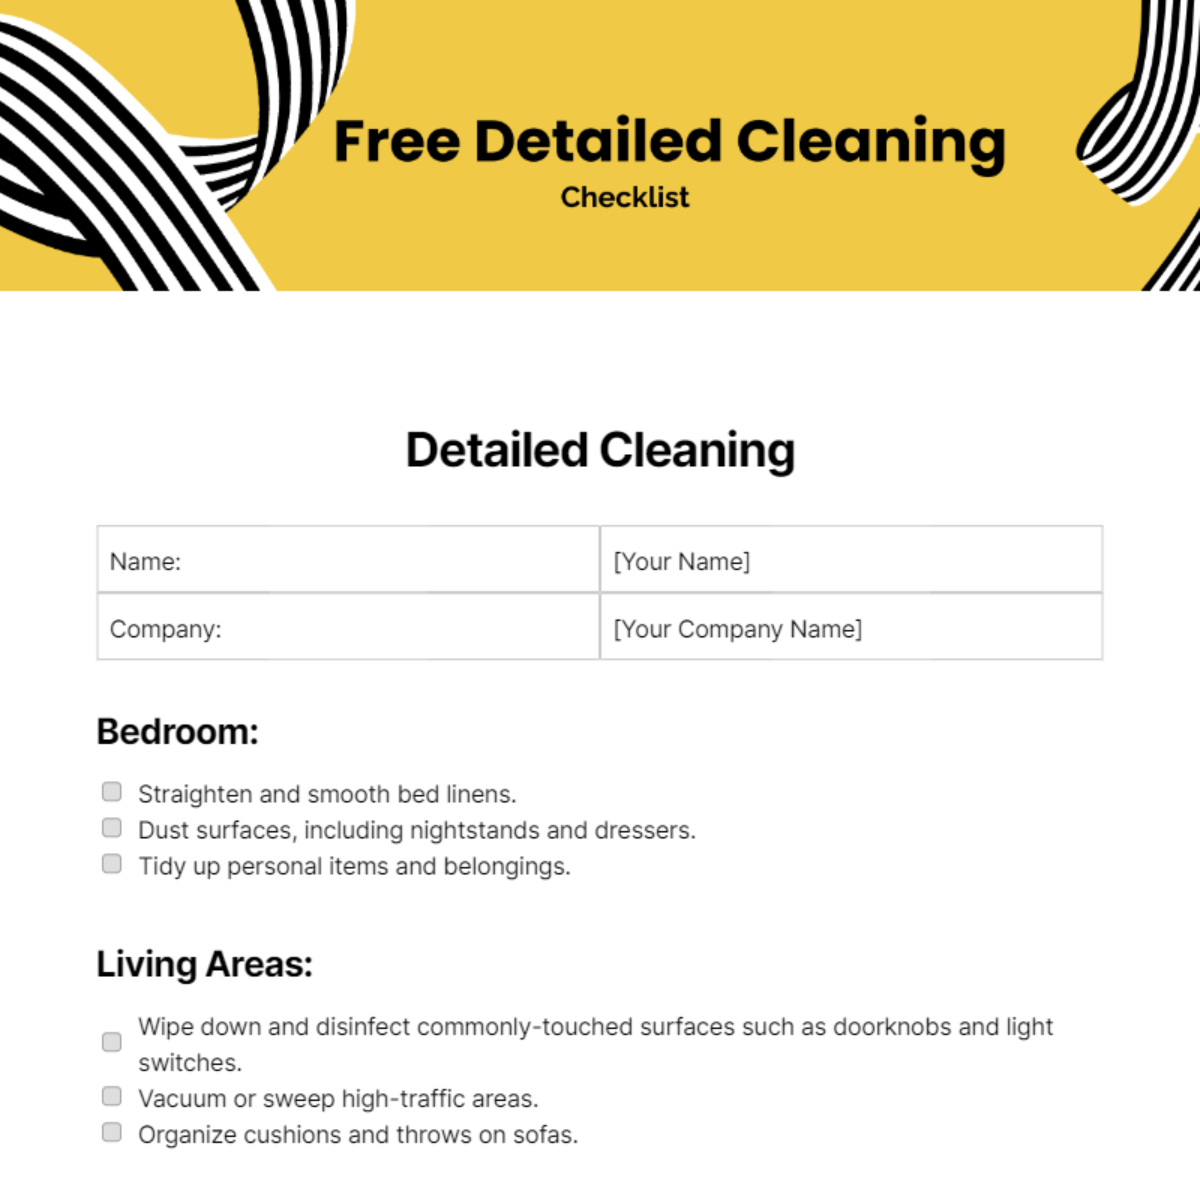 Free Detailed Cleaning Checklist Template